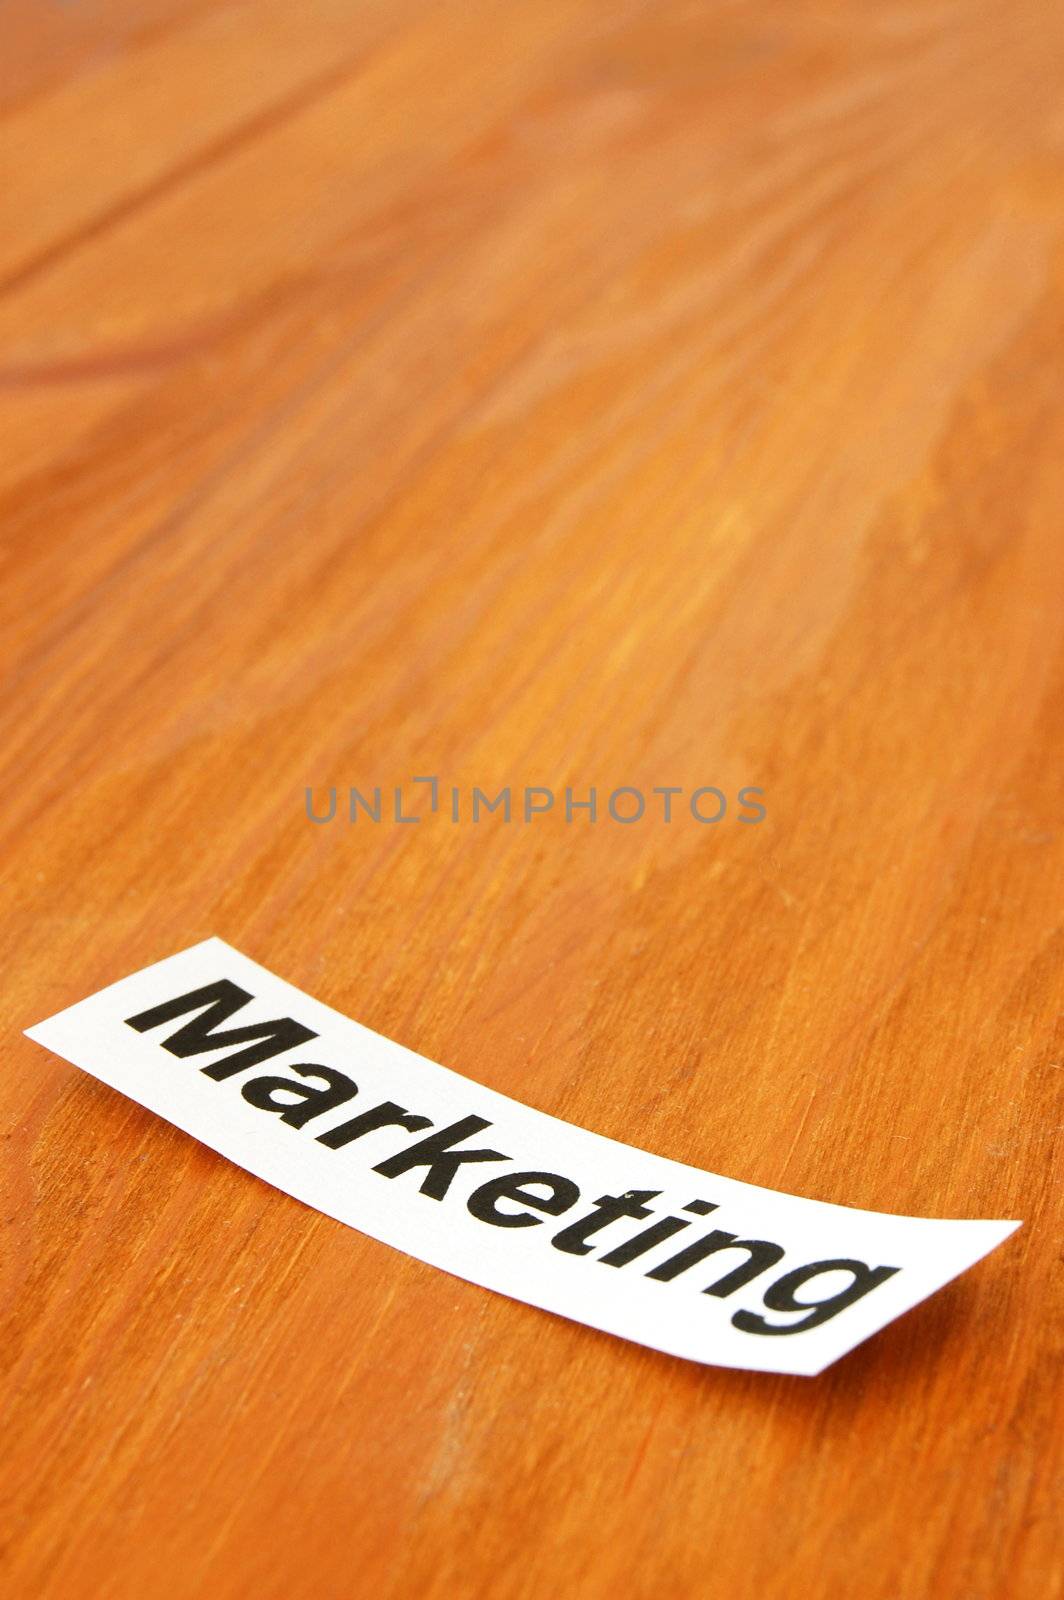 marketing business image with free space for text